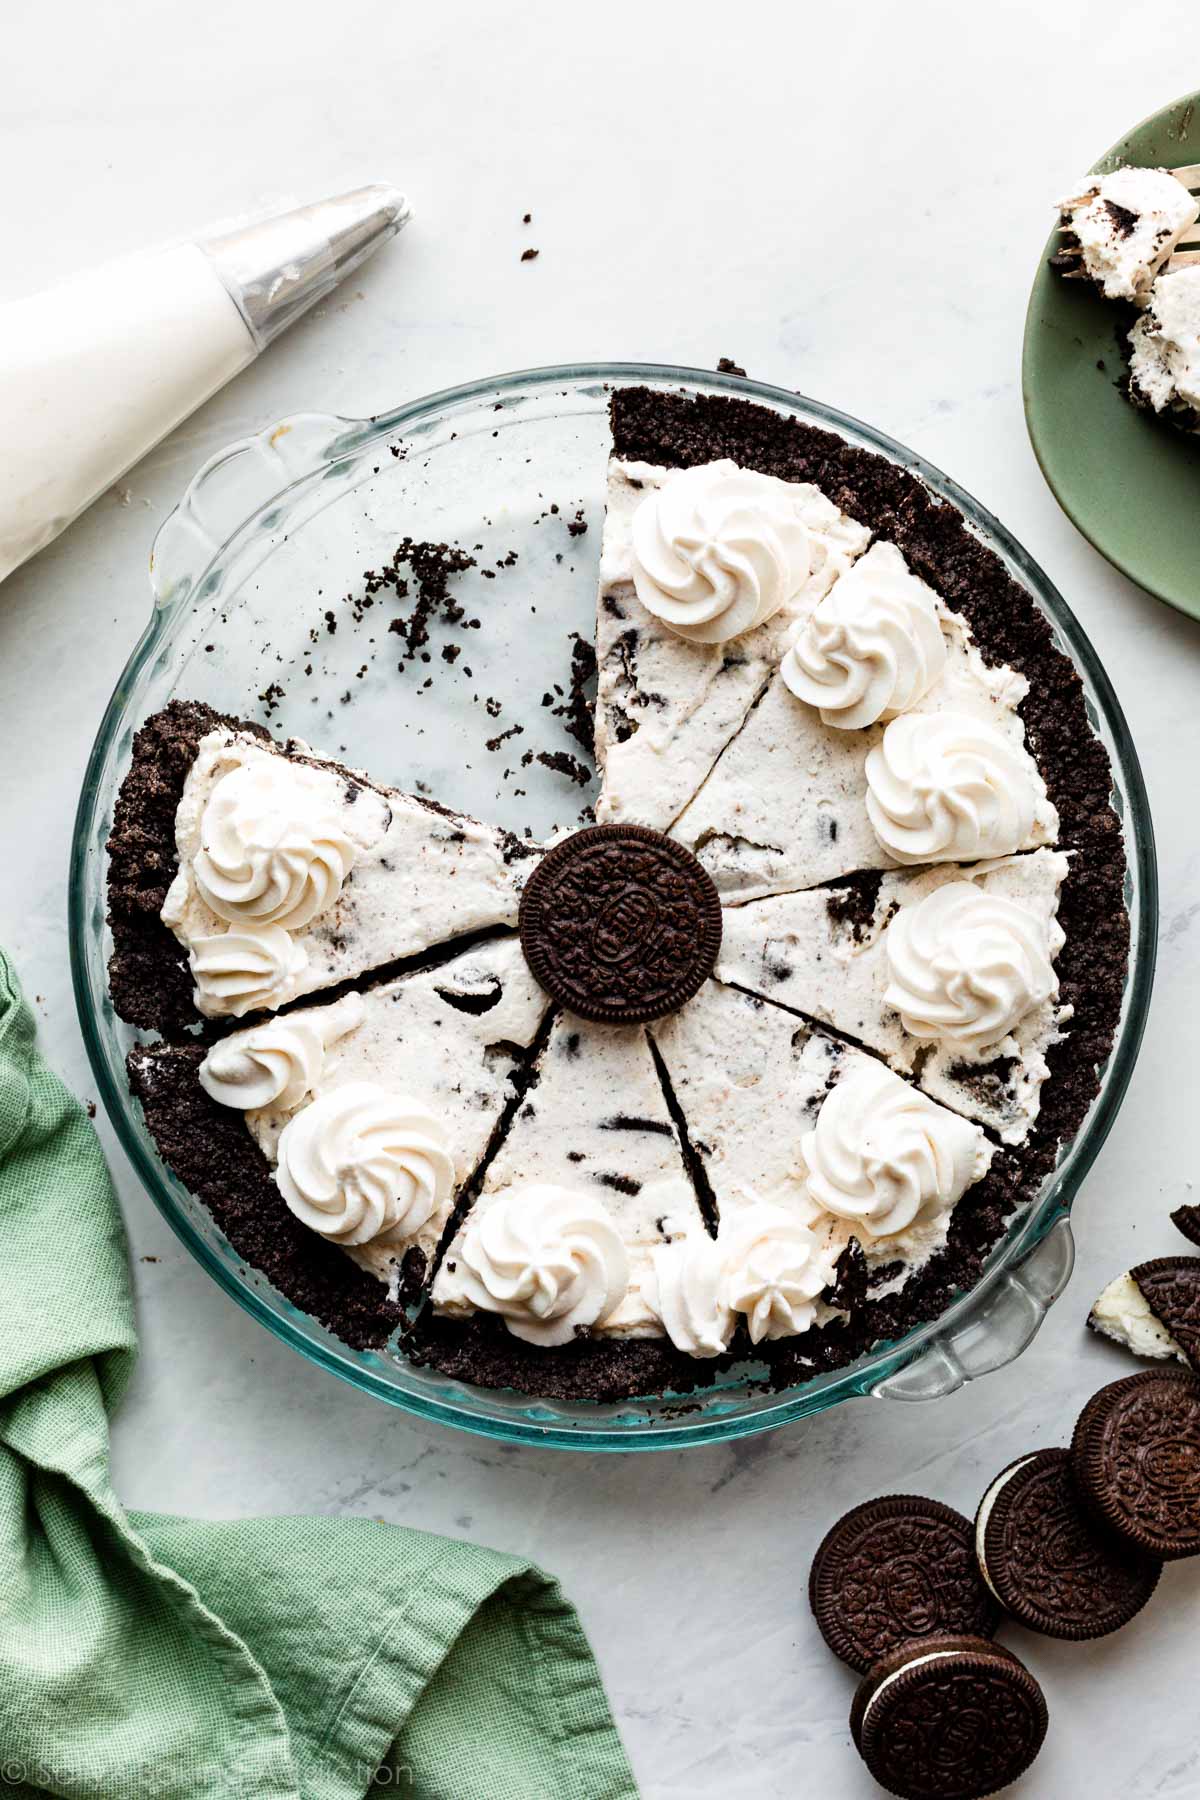 Oreo cookies and cream pie with whipped cream on top